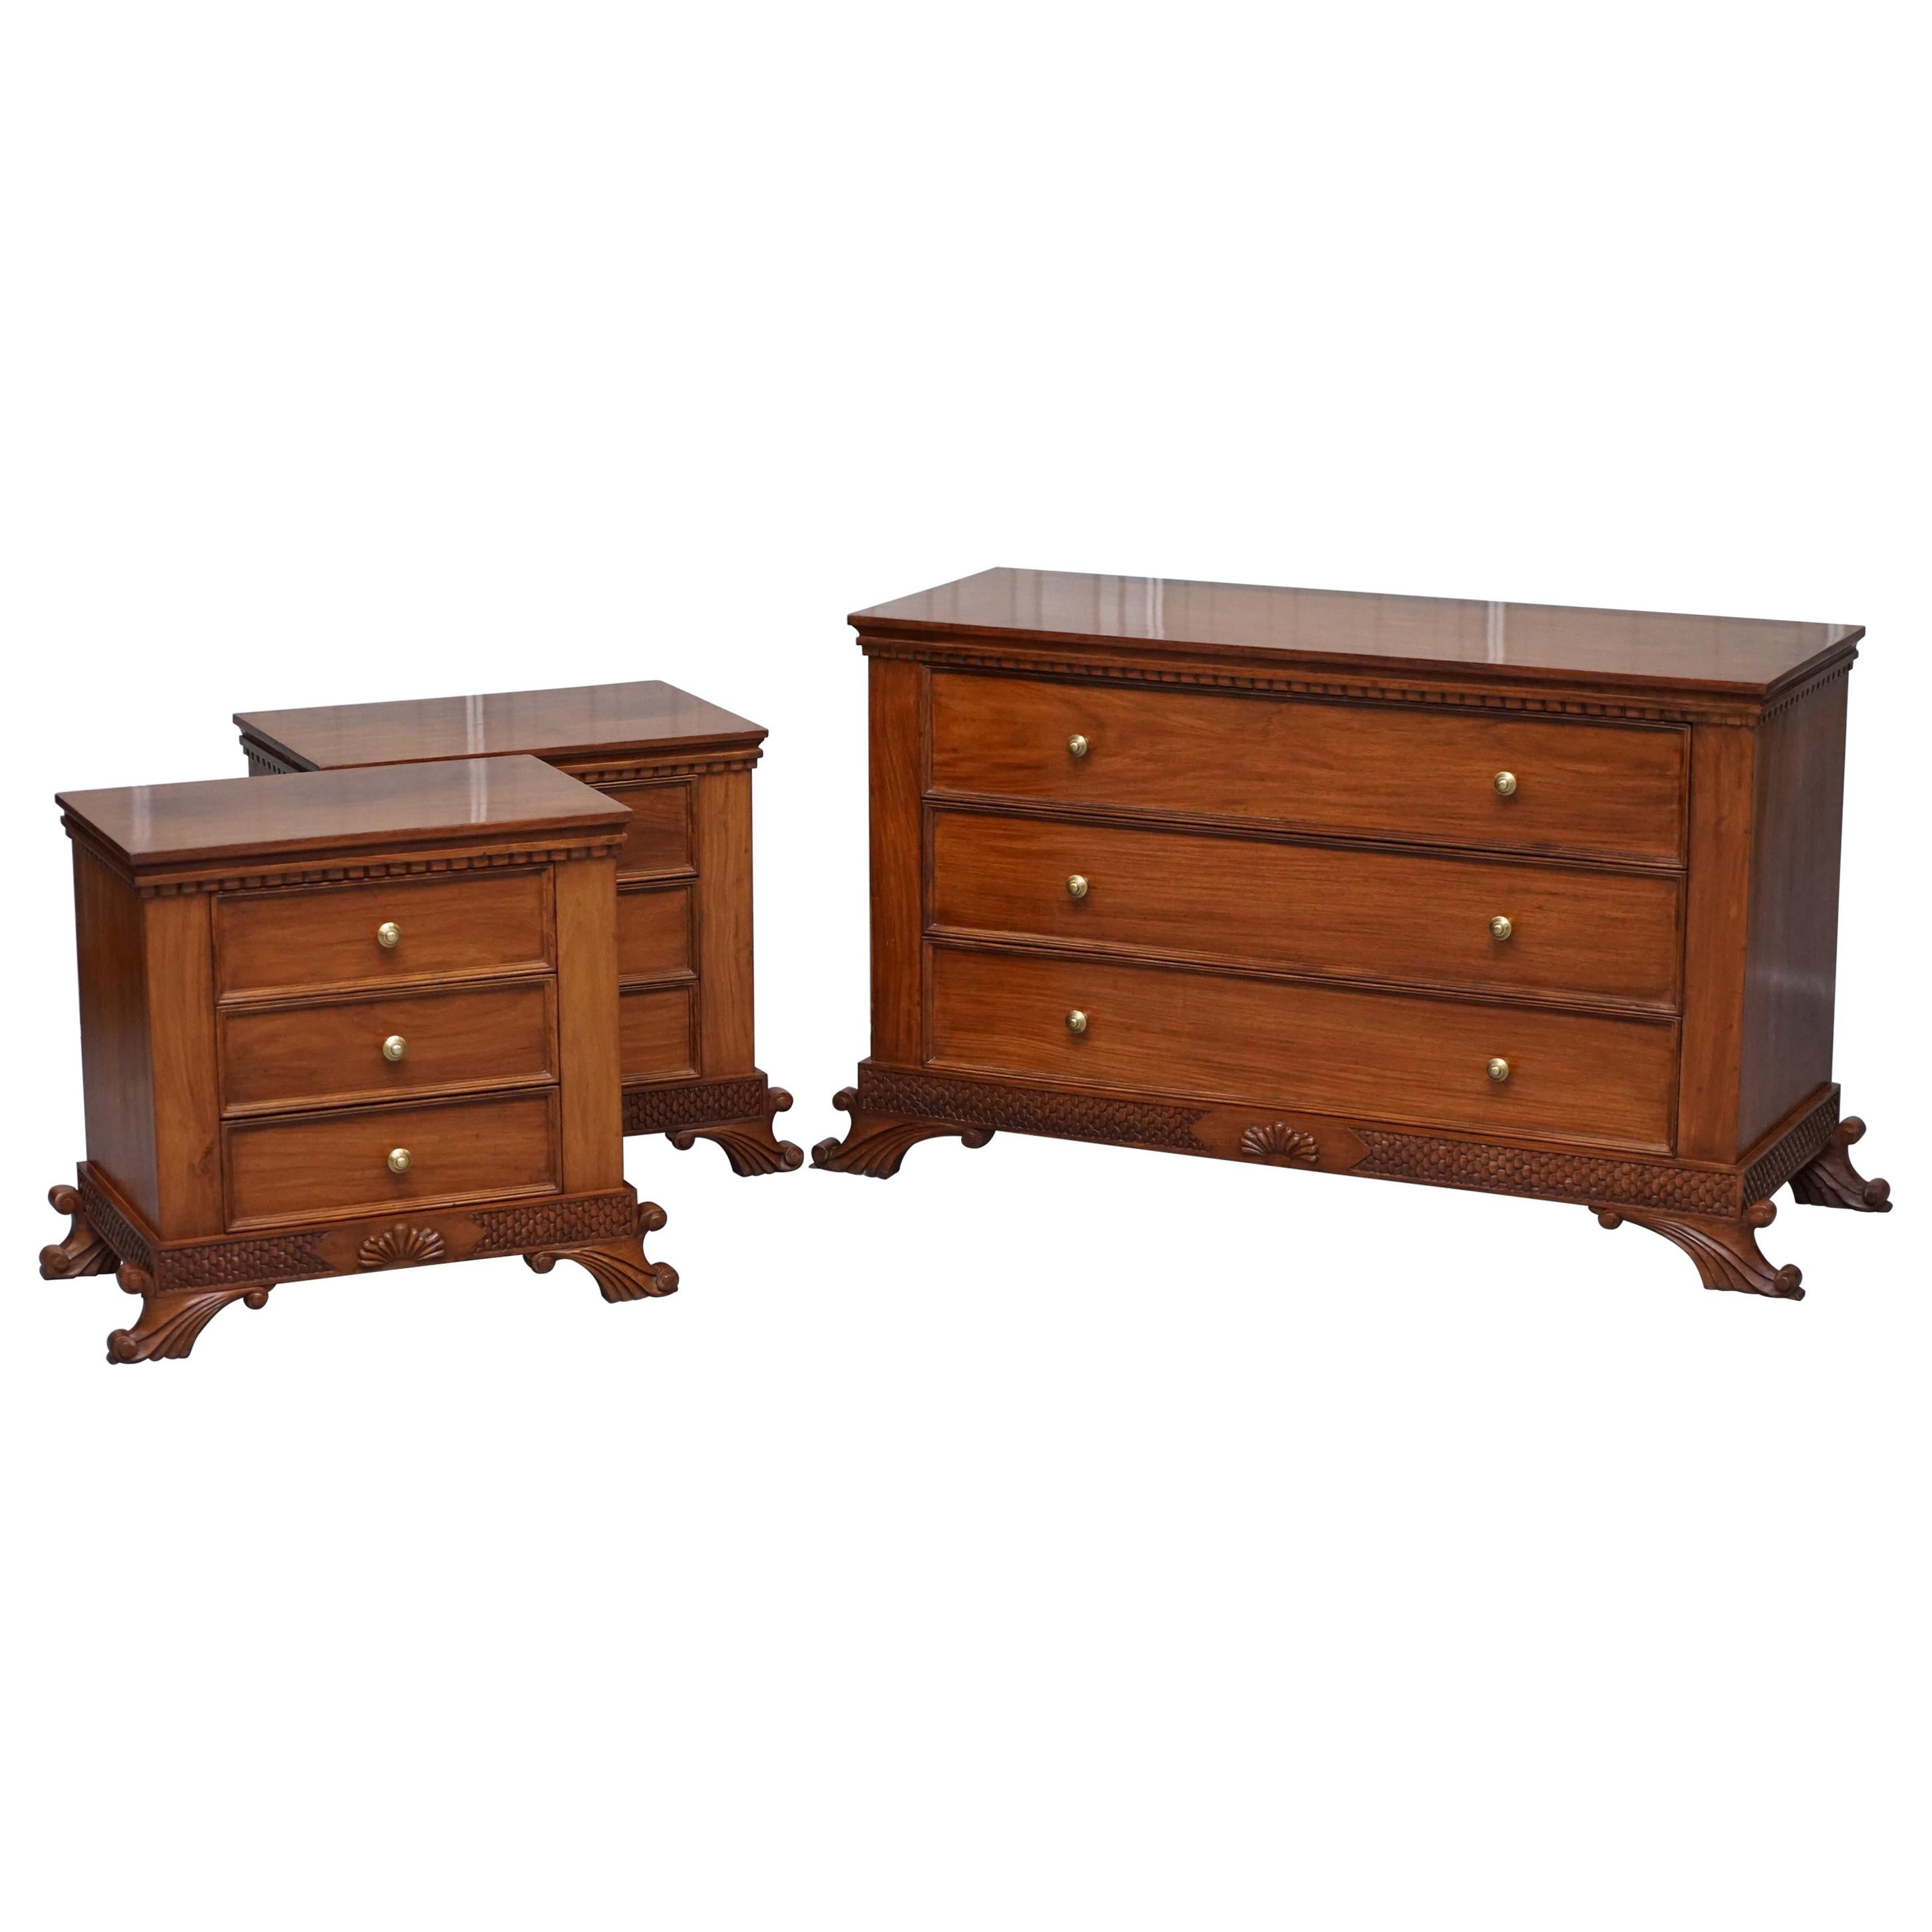 Stunning Suite of Panelled Hardwood Chests of Drawers Ornately Carved Bases